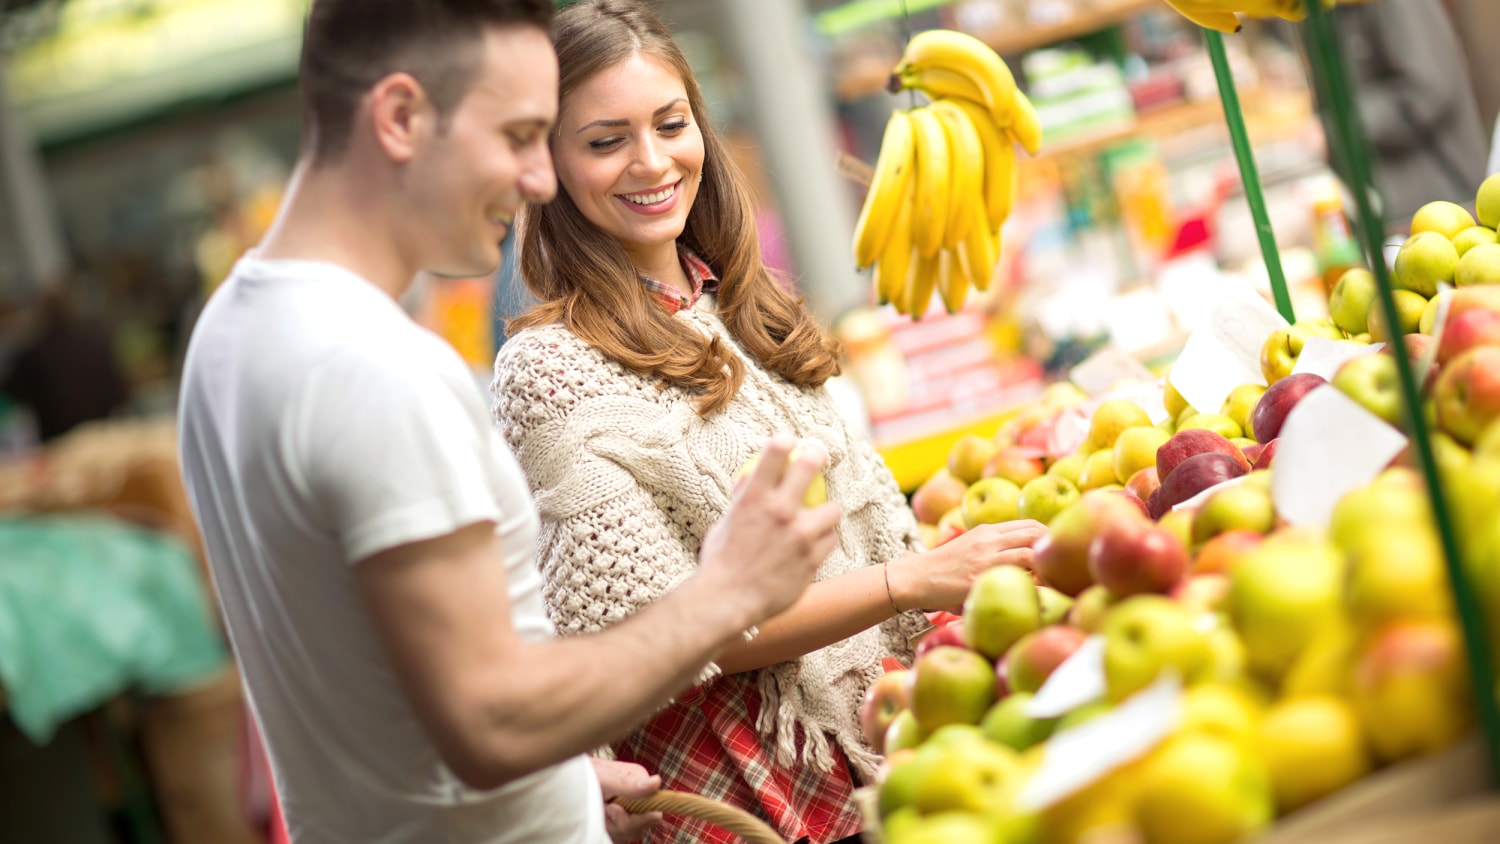 Top 5 Tips for Shopping the Produce Aisle